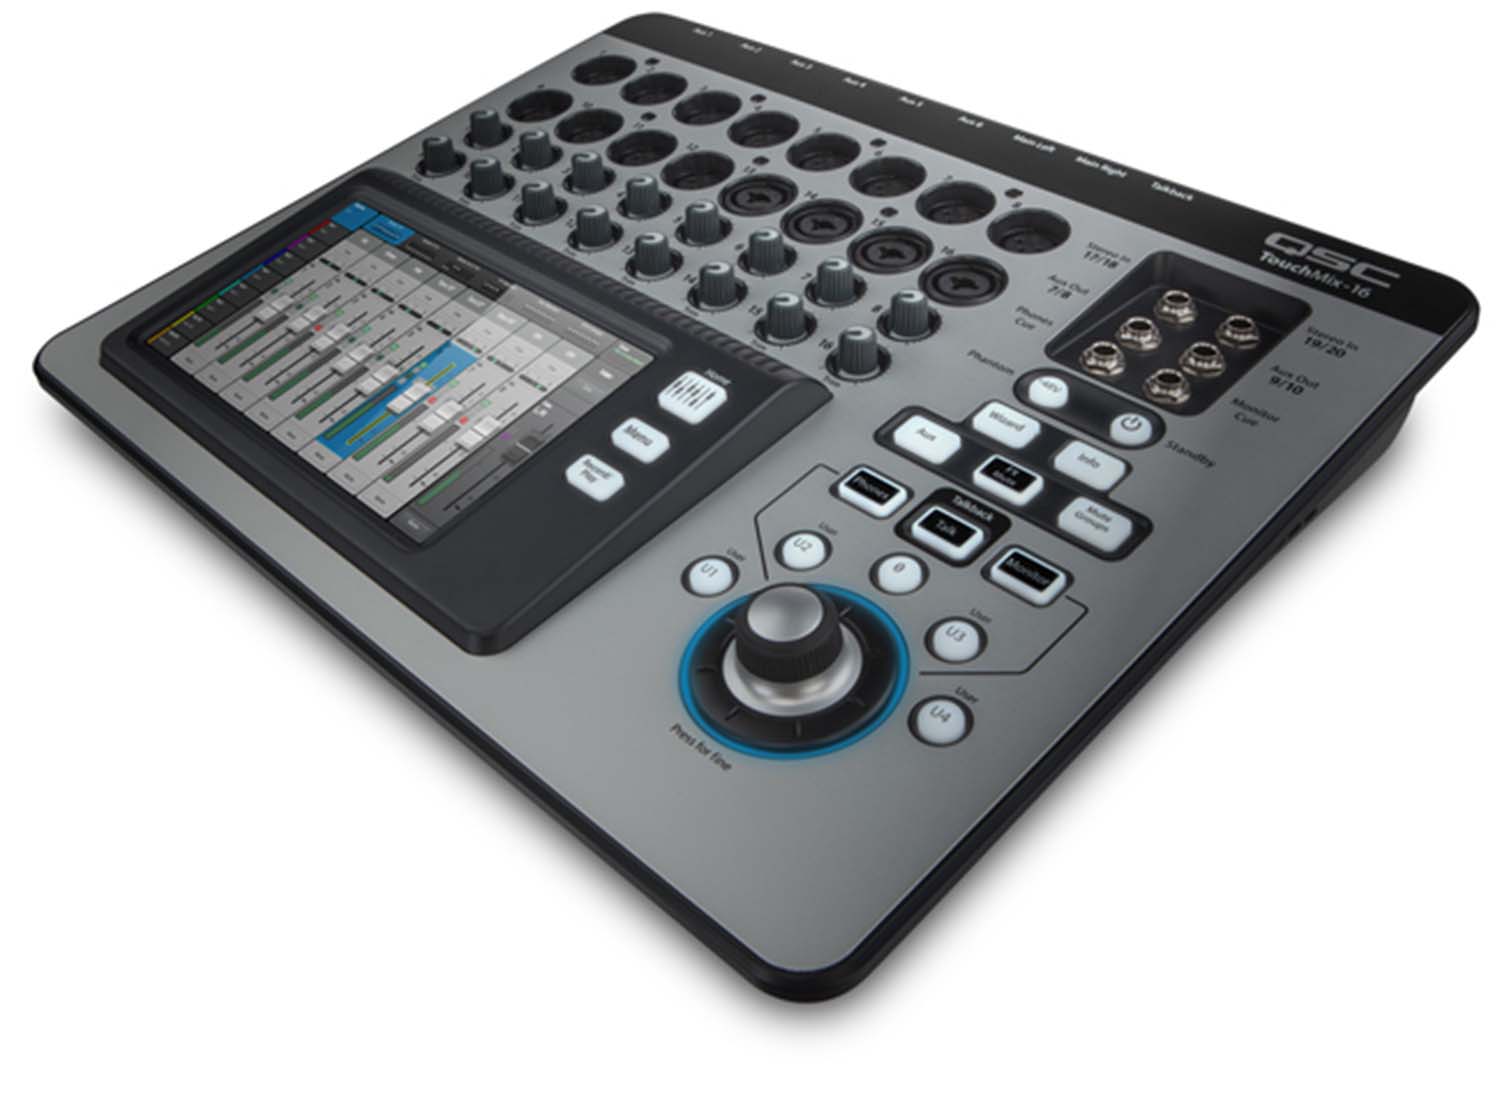 Discontinued: Open Box: QSC TouchMix-16 Compact Digital Mixer With 22-Channels - Hollywood DJ